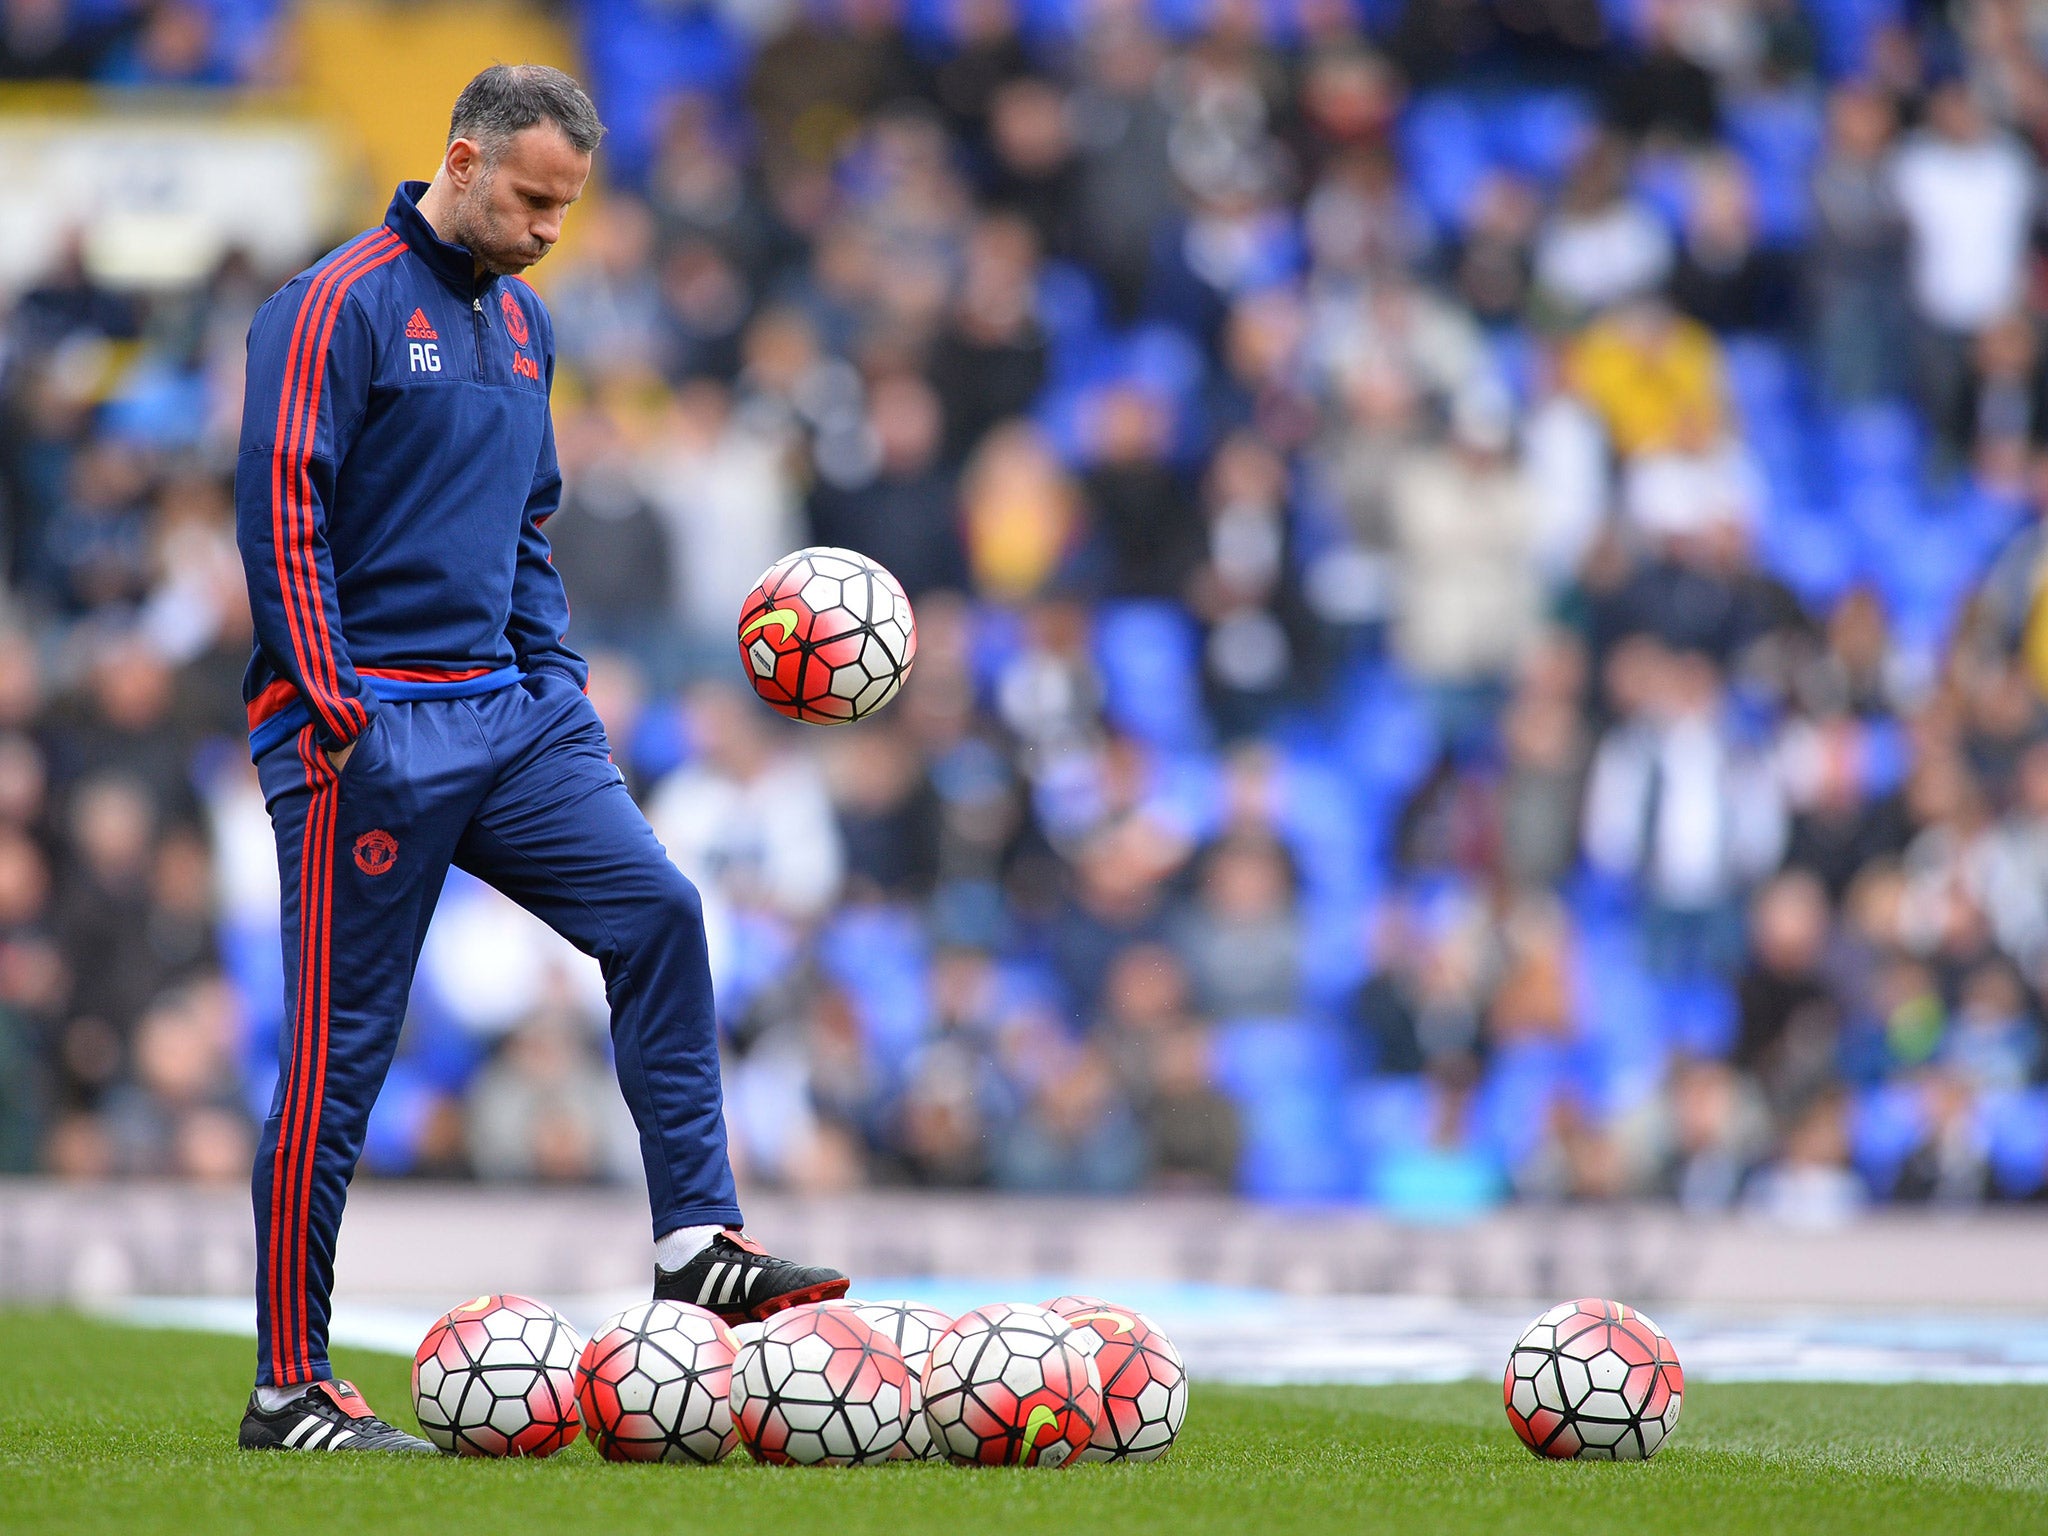 Ryan Giggs could stay at Manchester United in a role of his choosing